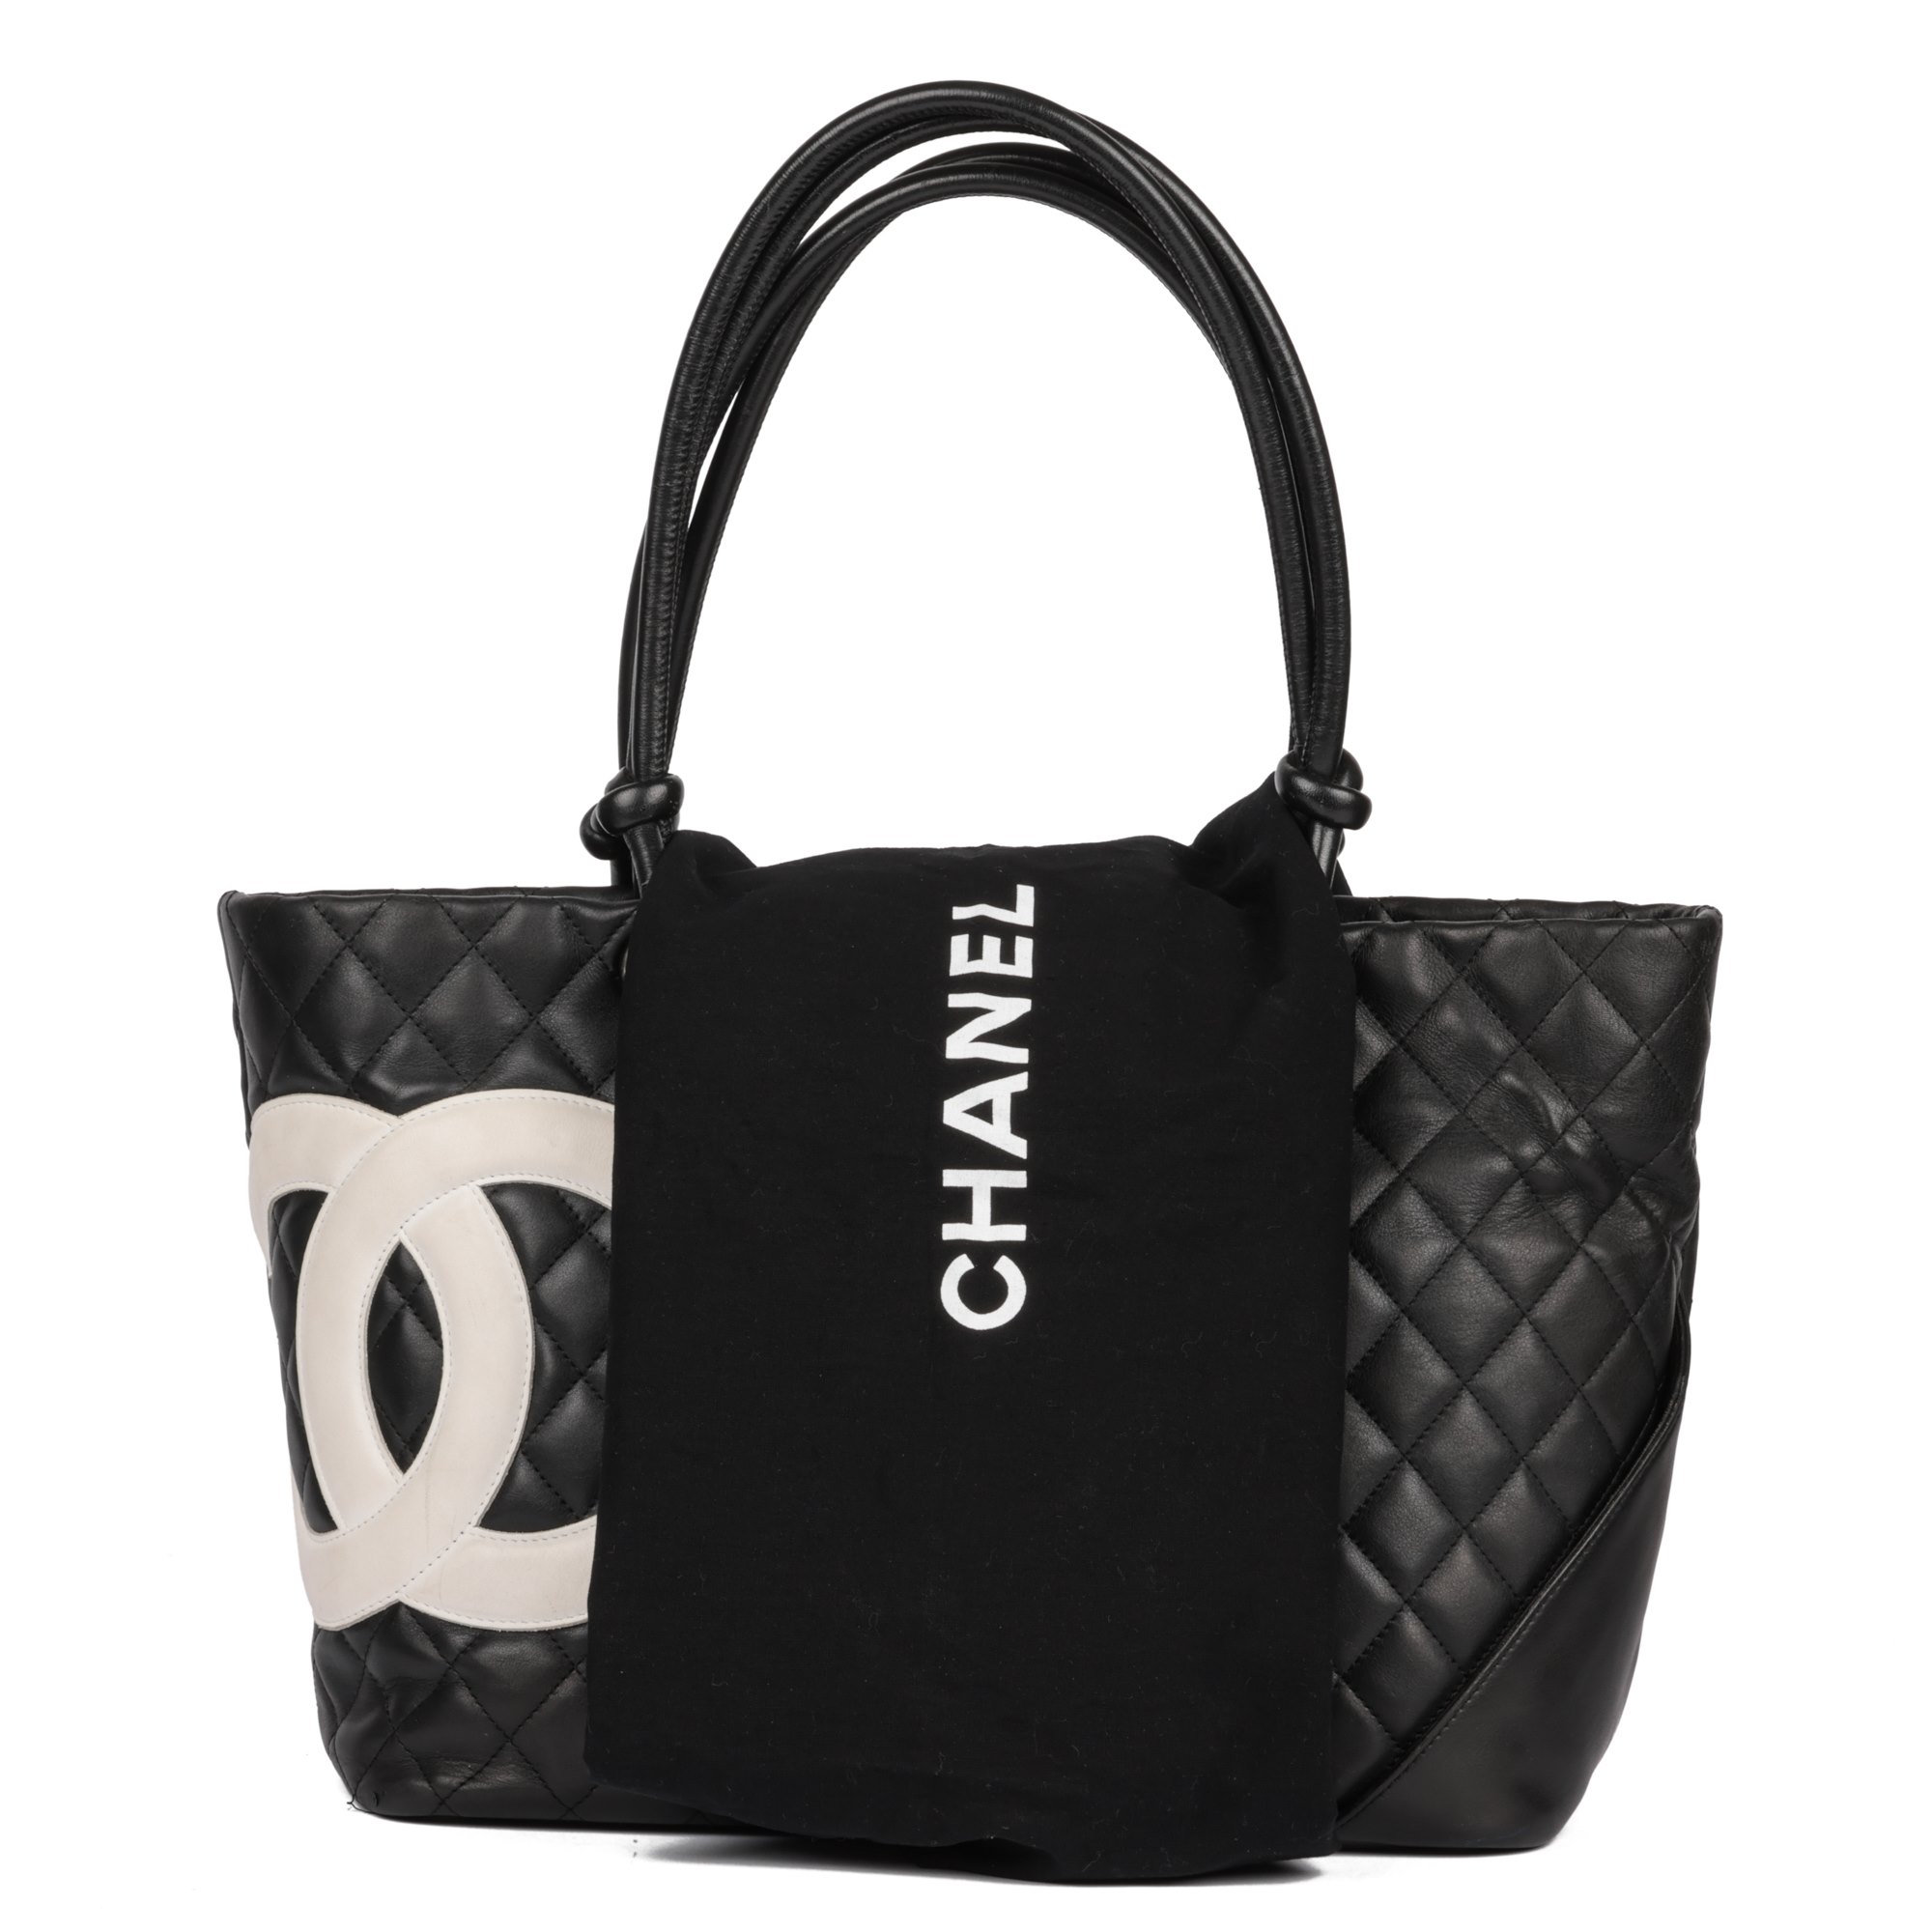 Chanel Black Quilted Lambskin Small Cambon Tote Bag